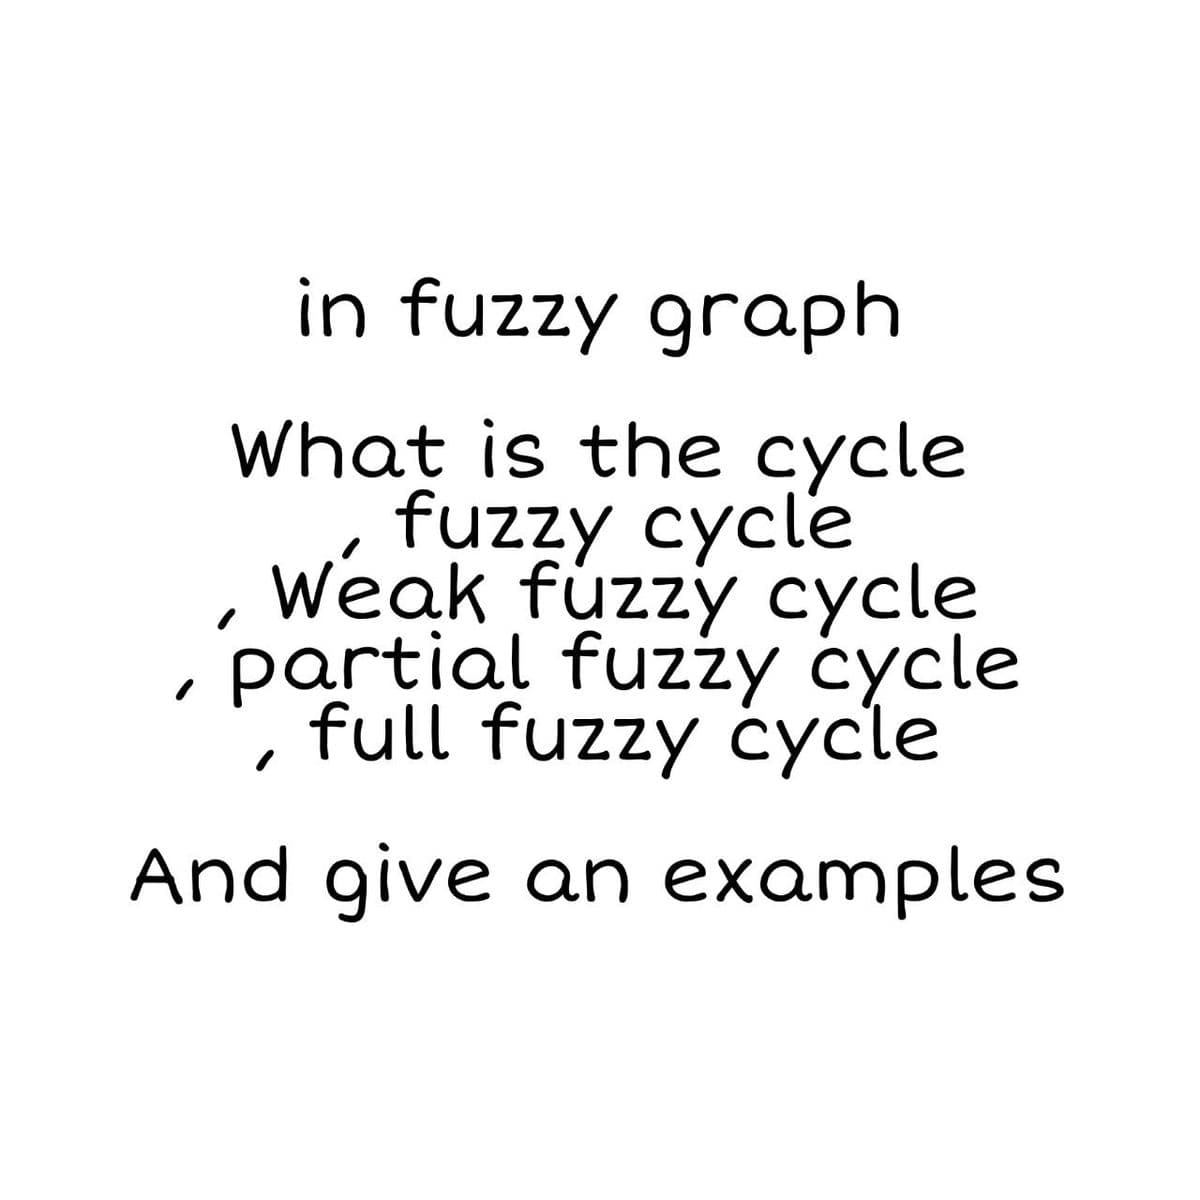 in fuzzy graph
What is the cycle
fuzzy cycle
Weak fuzzy cycle
partial fuzzy cycle
full fuzzy cycle
"
And give an examples